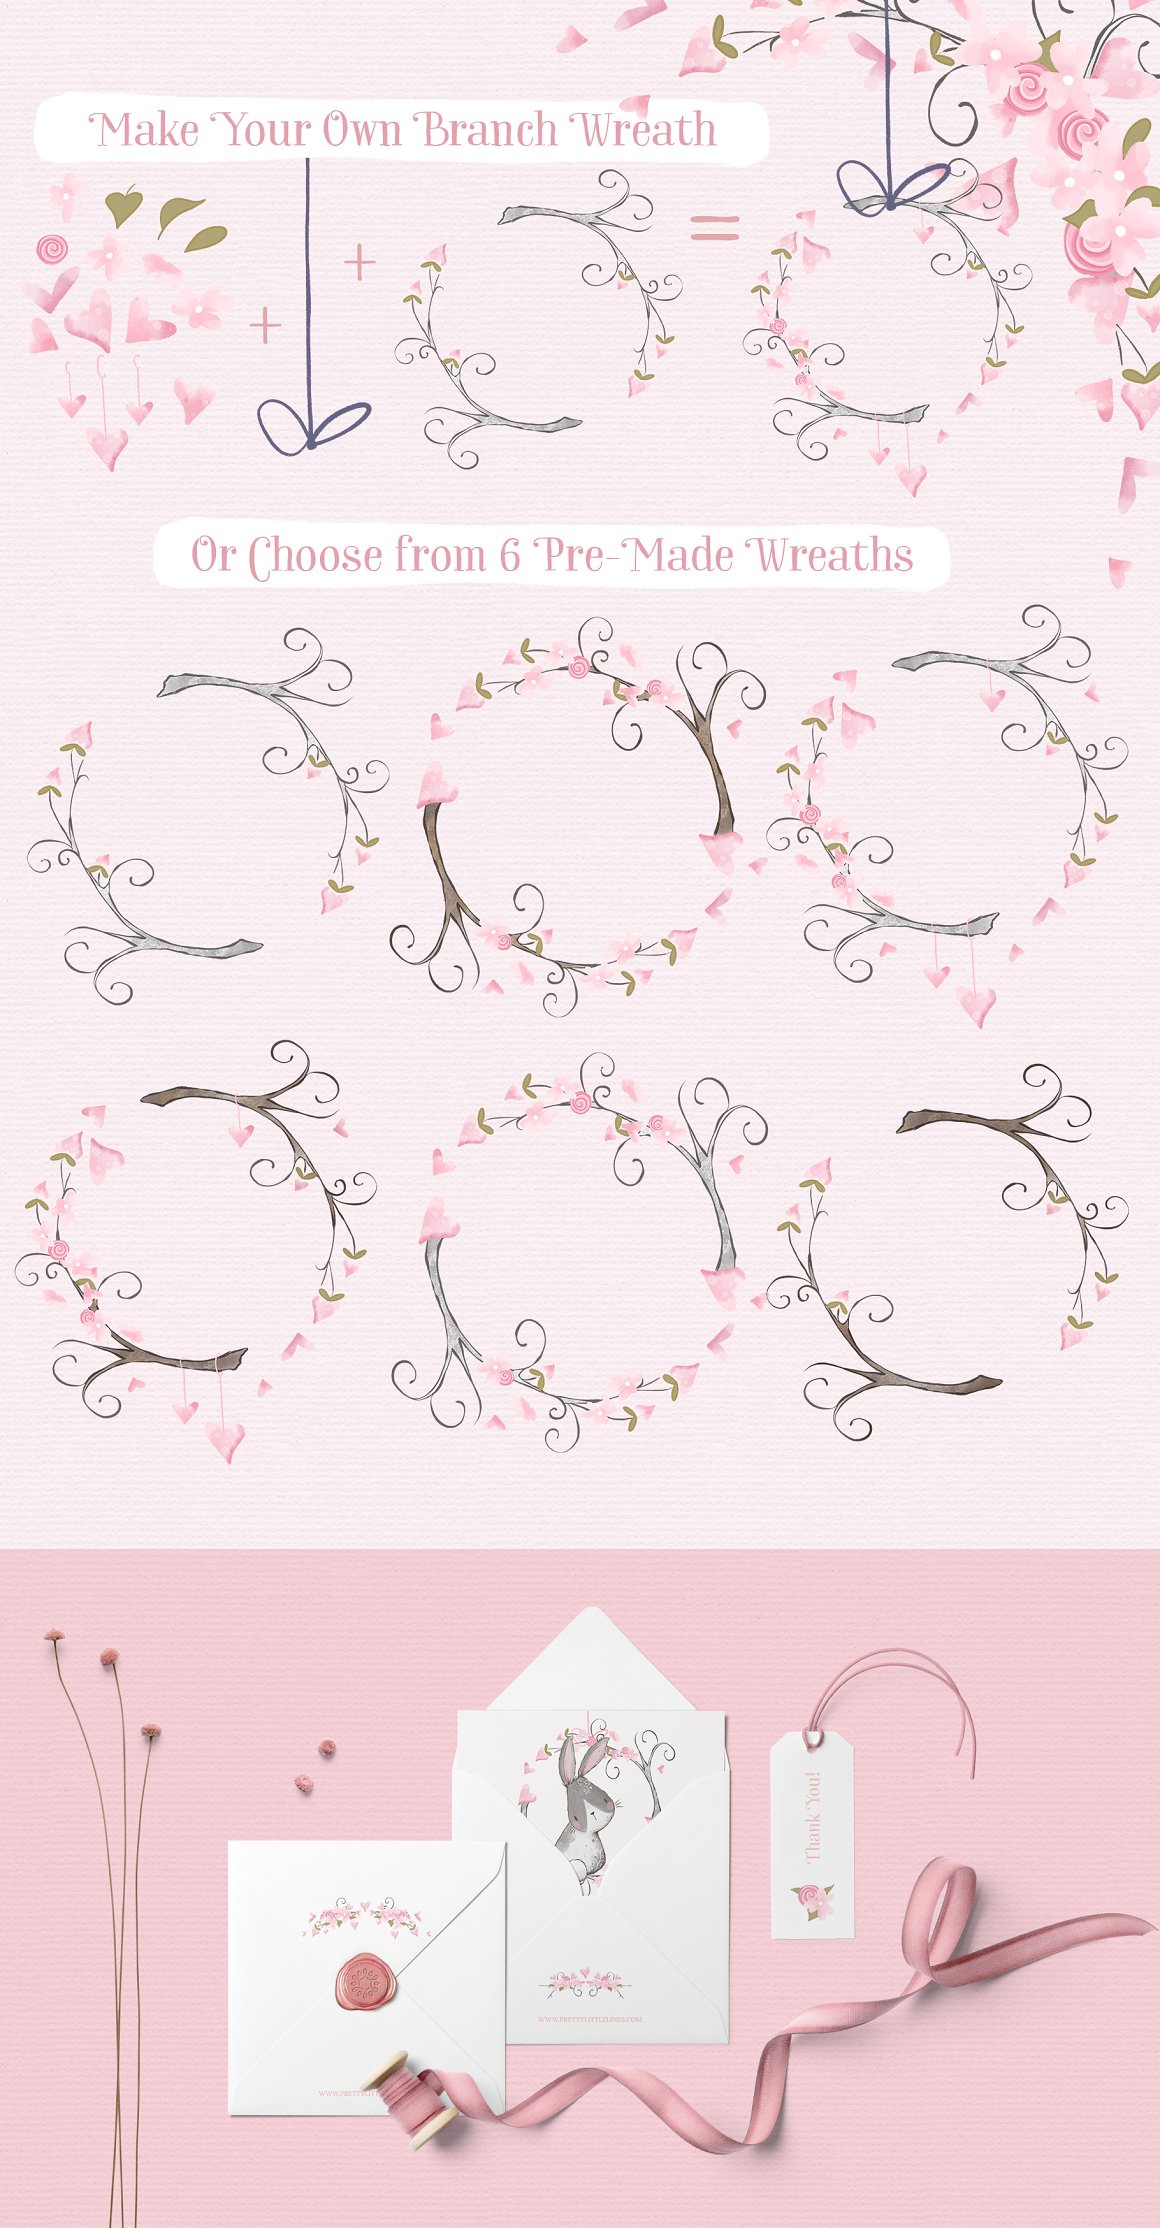 A set of 6 different pre-made wreaths and 2 white envelopes with white label on a pink background.